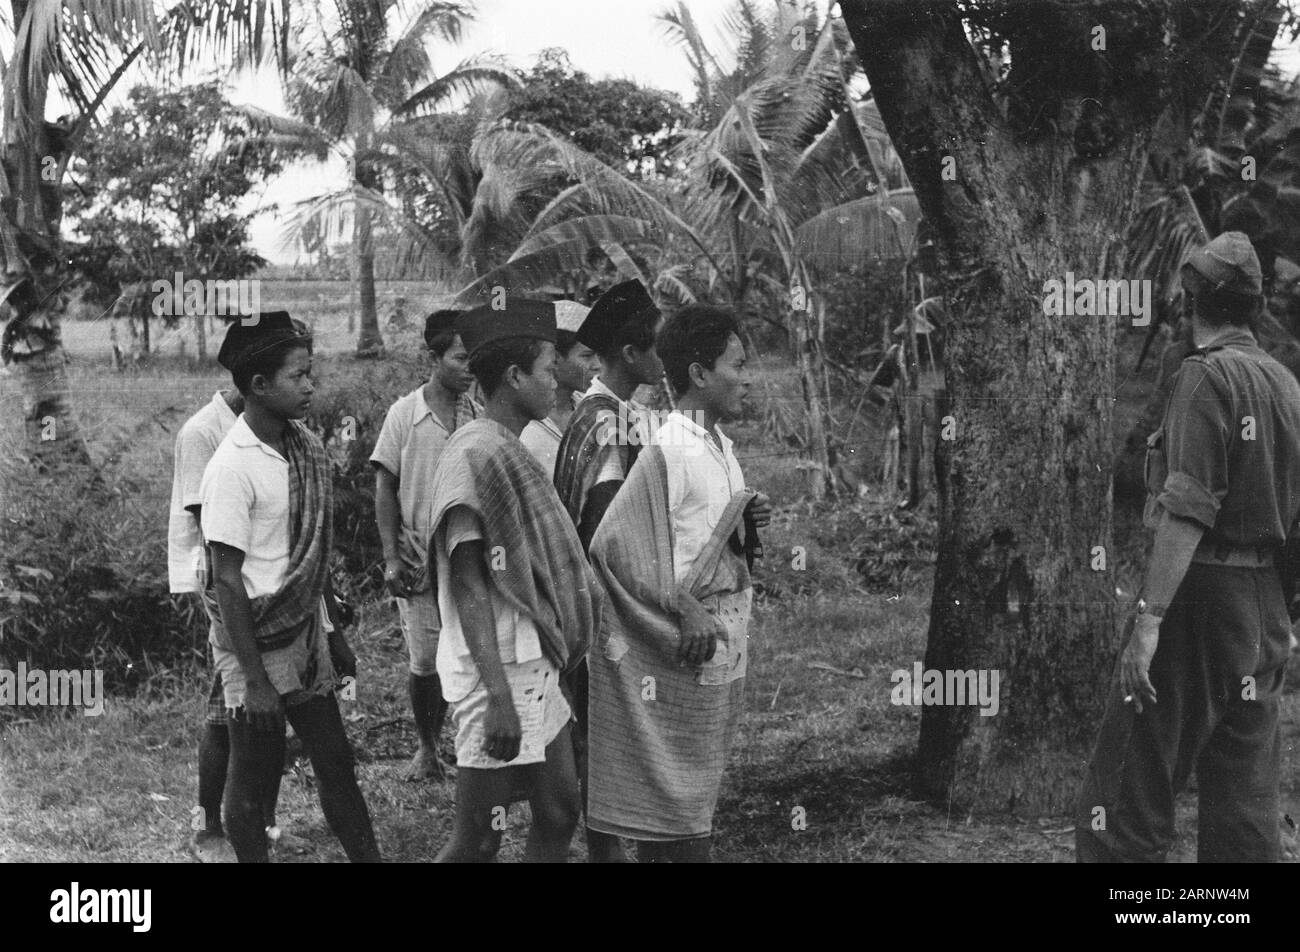 Visit of Van de Poll and Van de Kieft to Semarang  Young Indonesians (who go to a mosque or come from there?) Date: 1 August 1947 Location: Indonesia, Java, Dutch East Indies Stock Photo